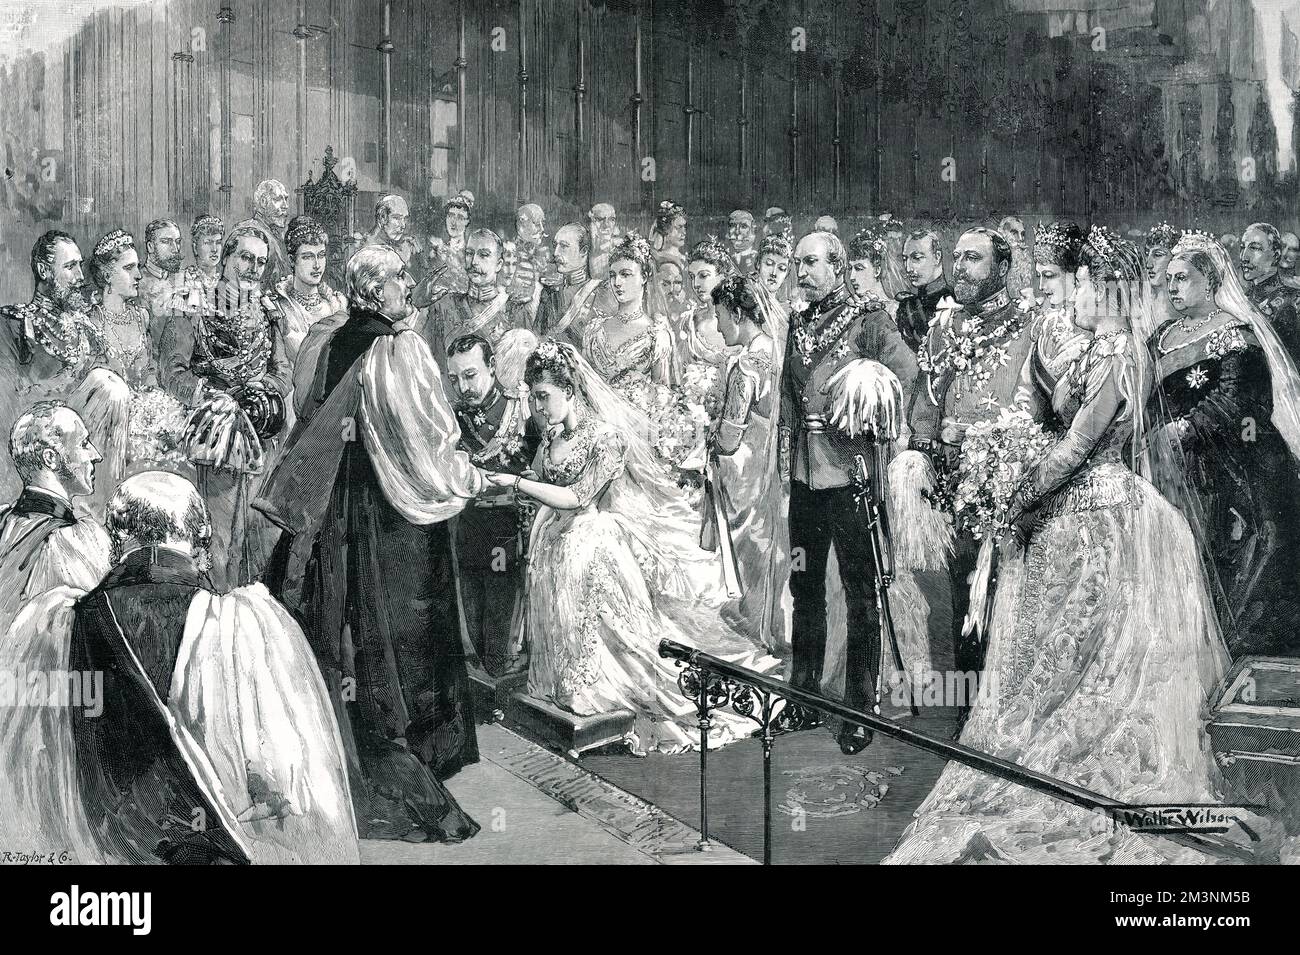 Marriage of Princess Marie-Louise of Schleswig-Holstein (younger daughter of Princess Helena, Princess Christian of Schleswig-Holstein), to Prince Aribert of Anhalt in St. George's Chapel at Windsor Castle in 1891.  Among the witnesses are the bride's father, Prince Christian and King Edward VII, as well as Queen Victoria. The marriage was later dissolved.     Date: 1891 Stock Photo